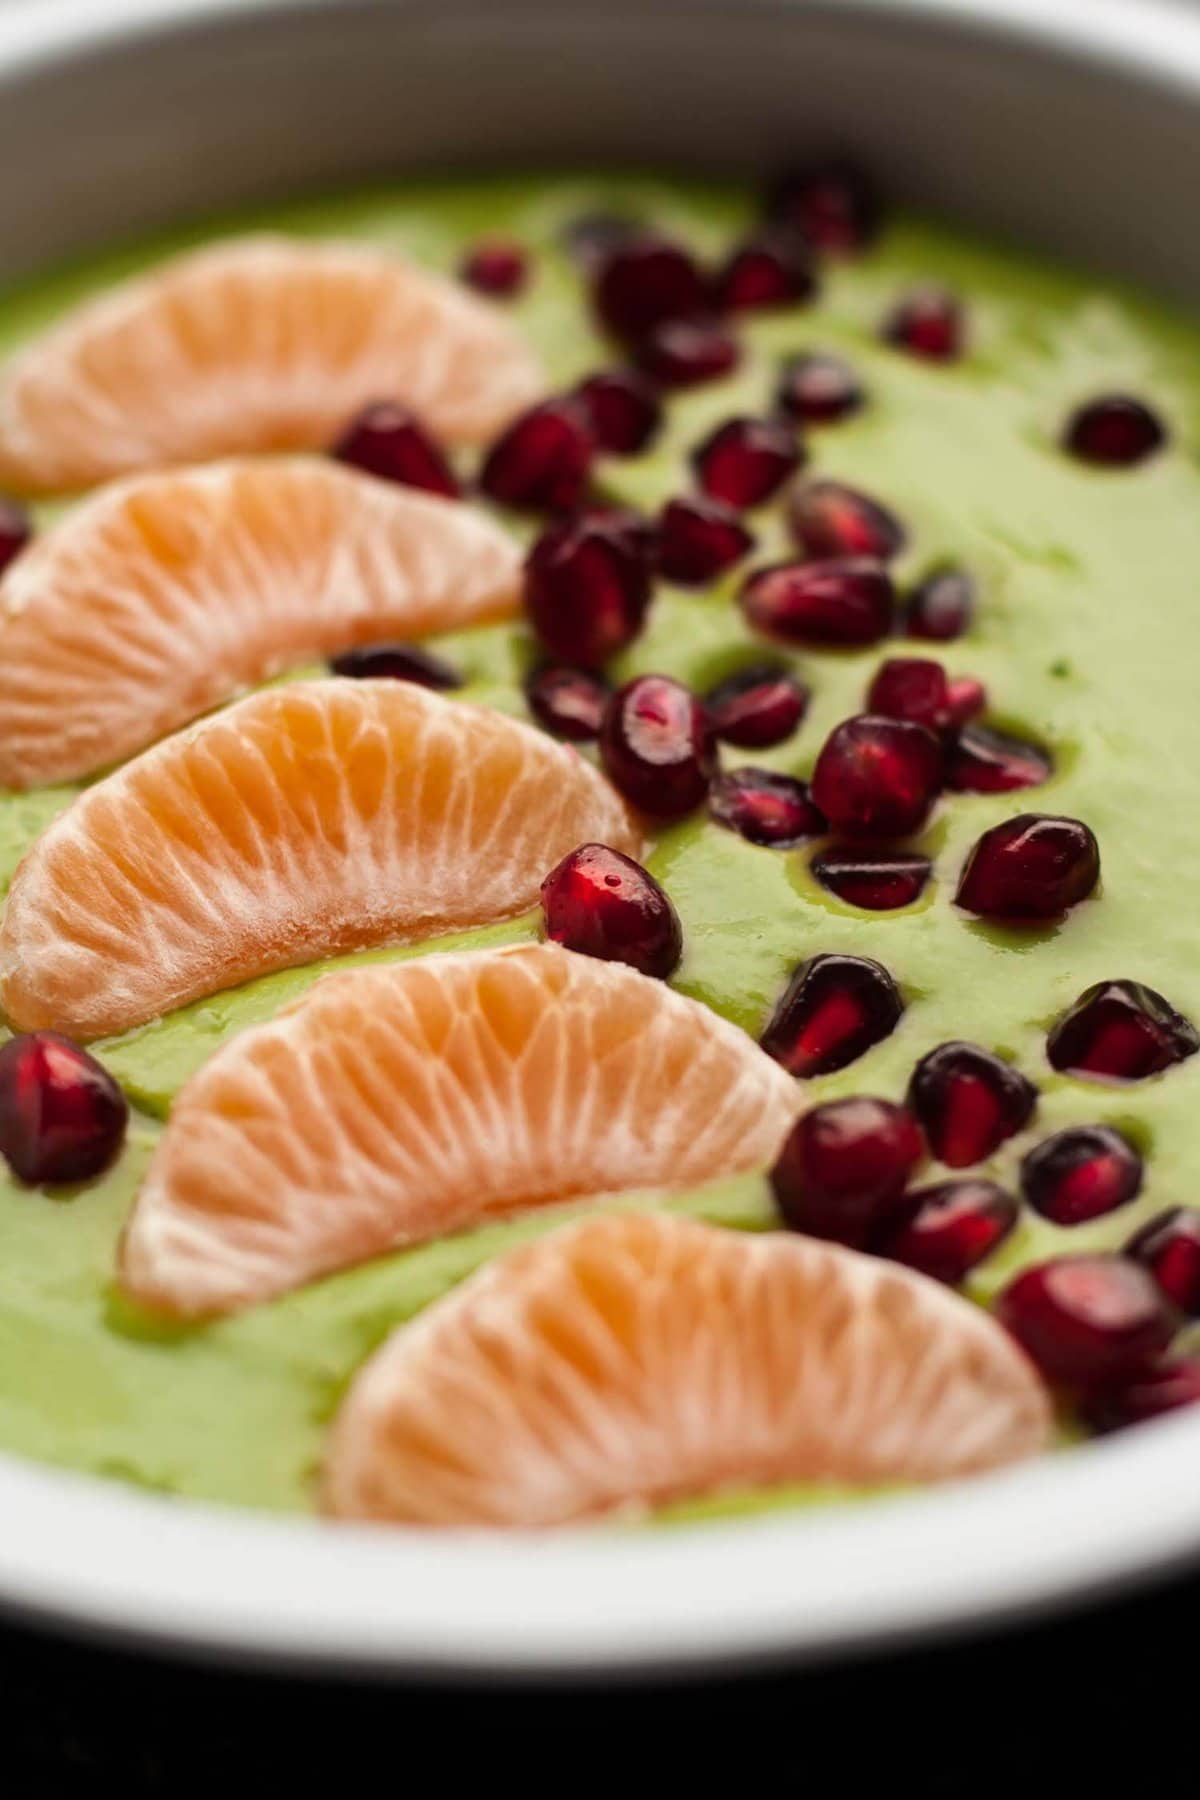 An array of clementine slices and pomegranate aryls on a green liquid.